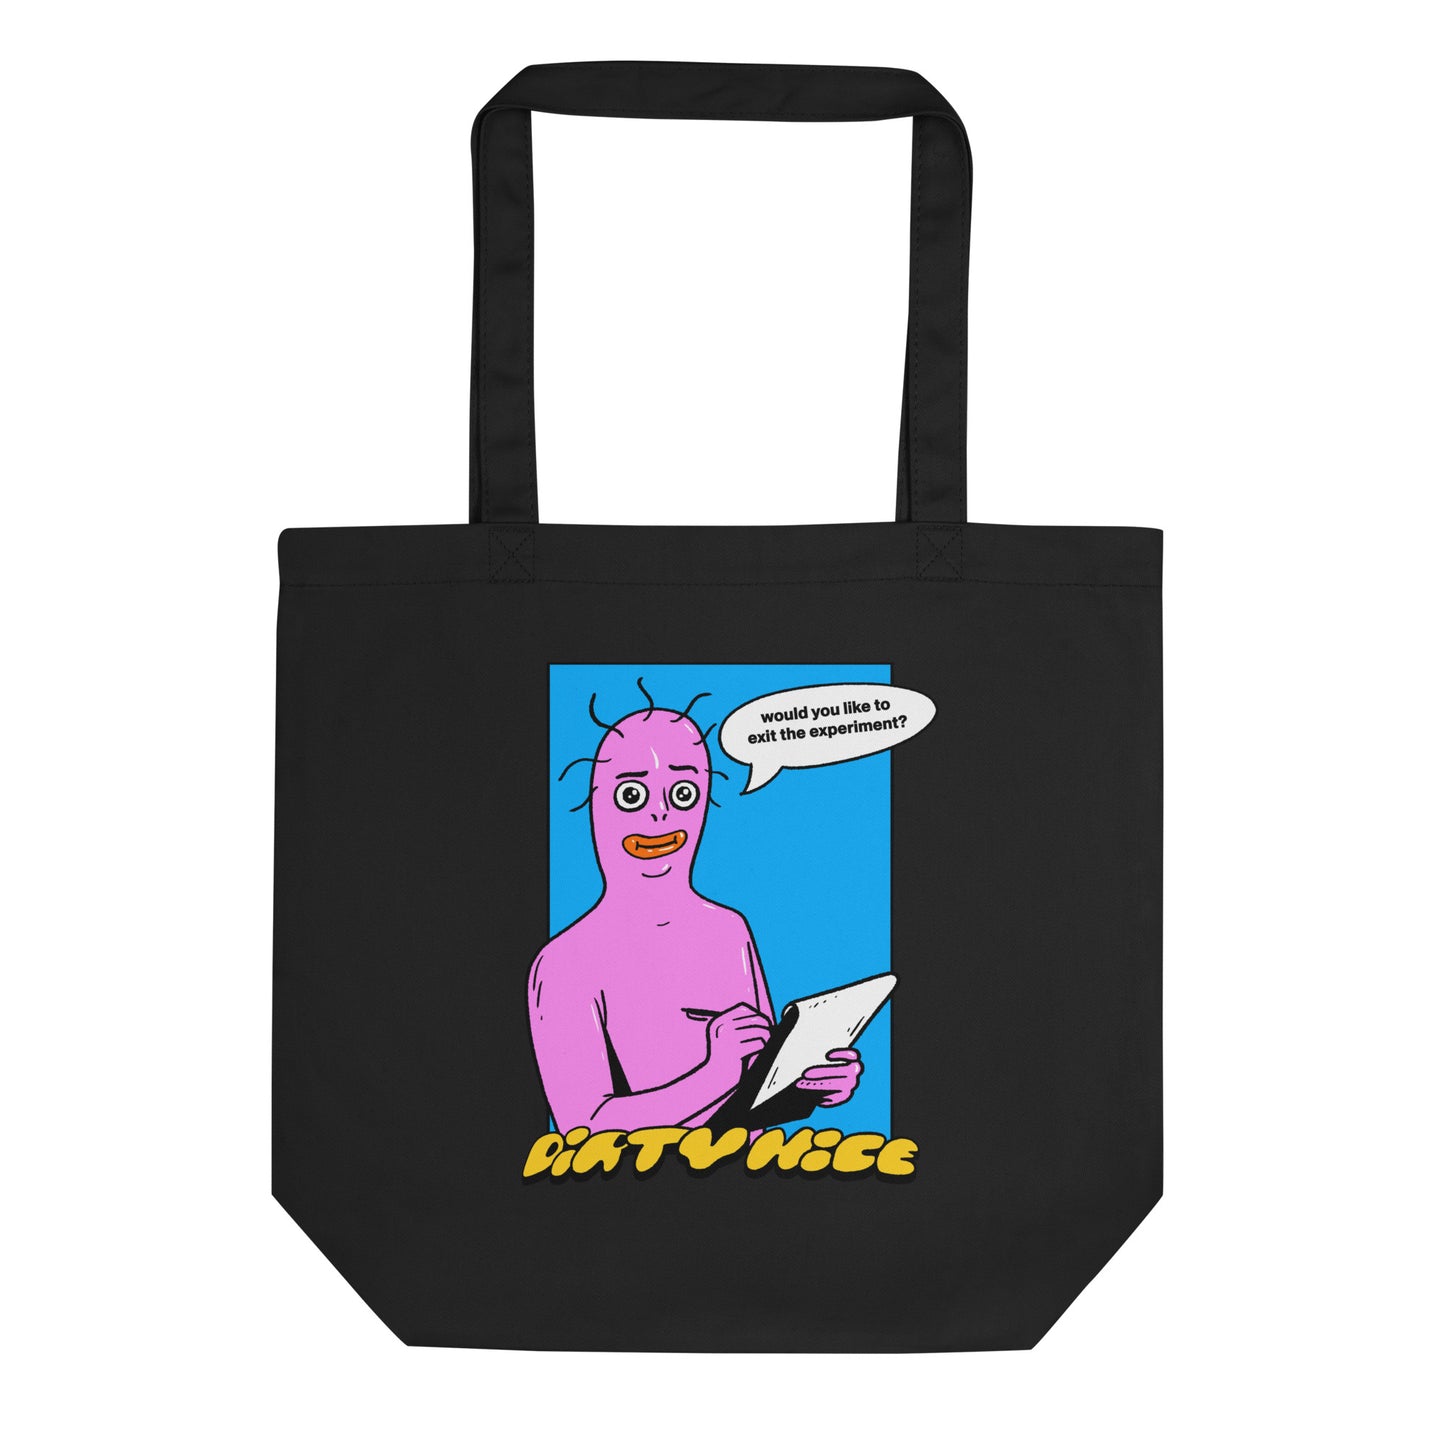 "Would You Like To Exit The Experiment?" Tote